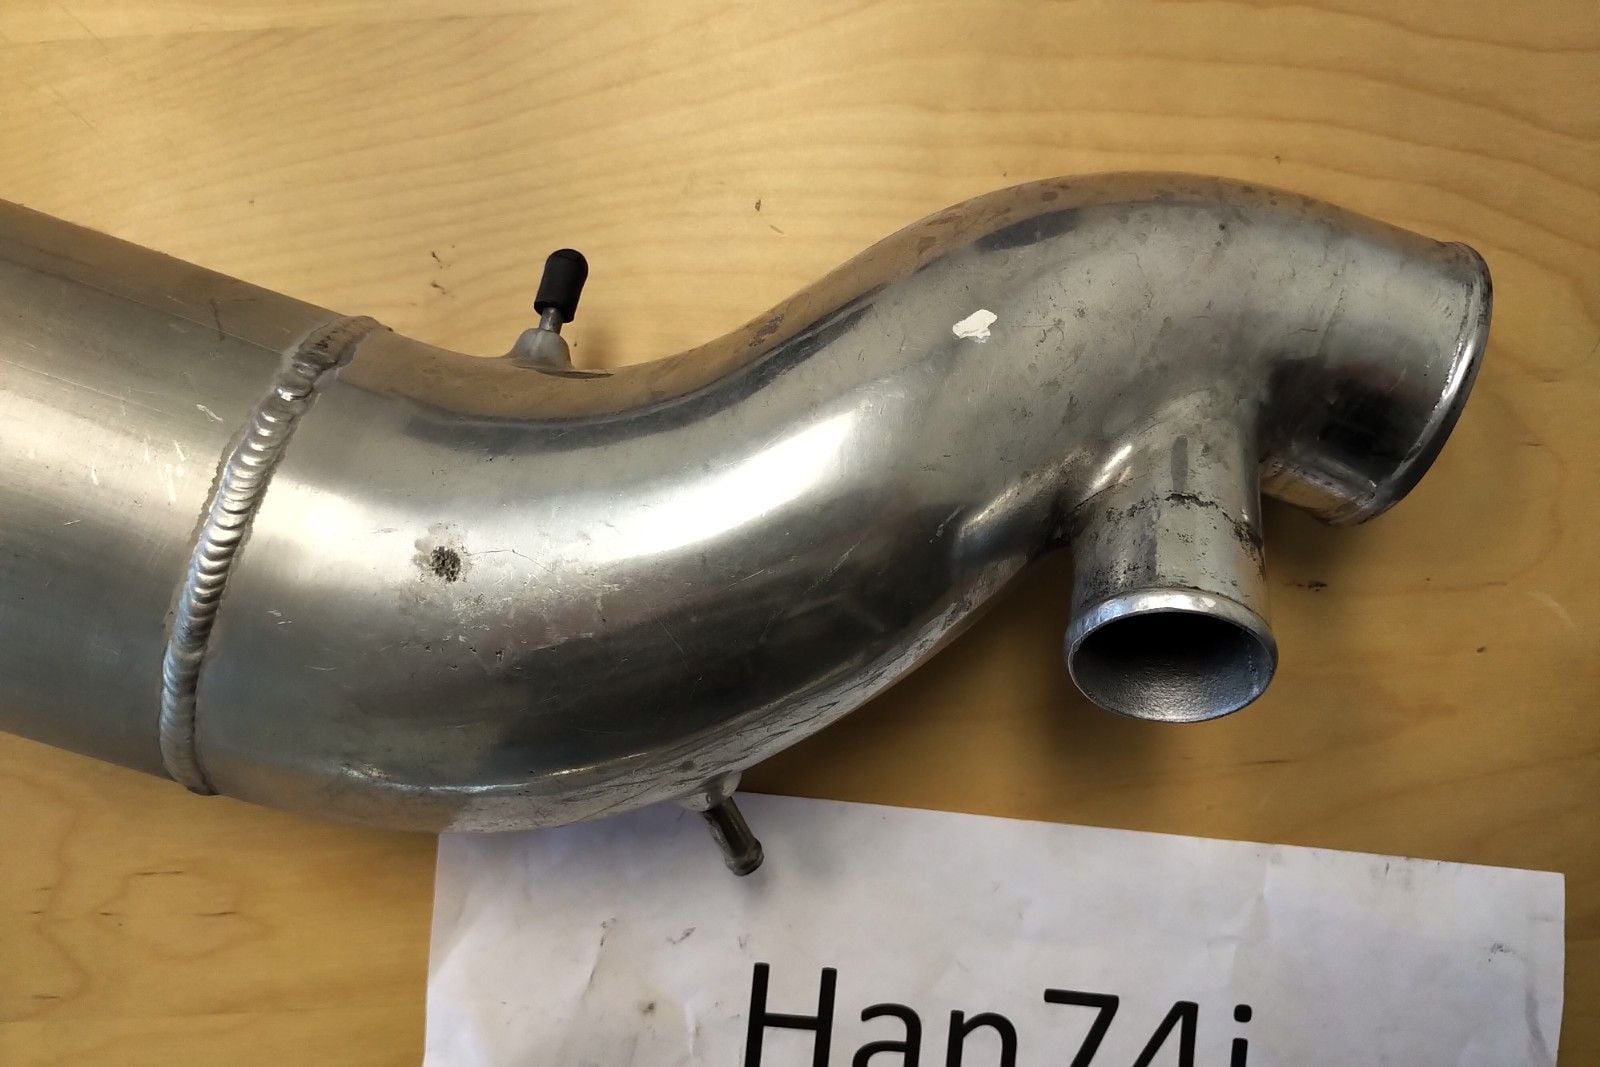 Miscellaneous - Mass Part Out - Aftermarket New Used - OE Exhaust - Used - Whittier, CA 90605, United States